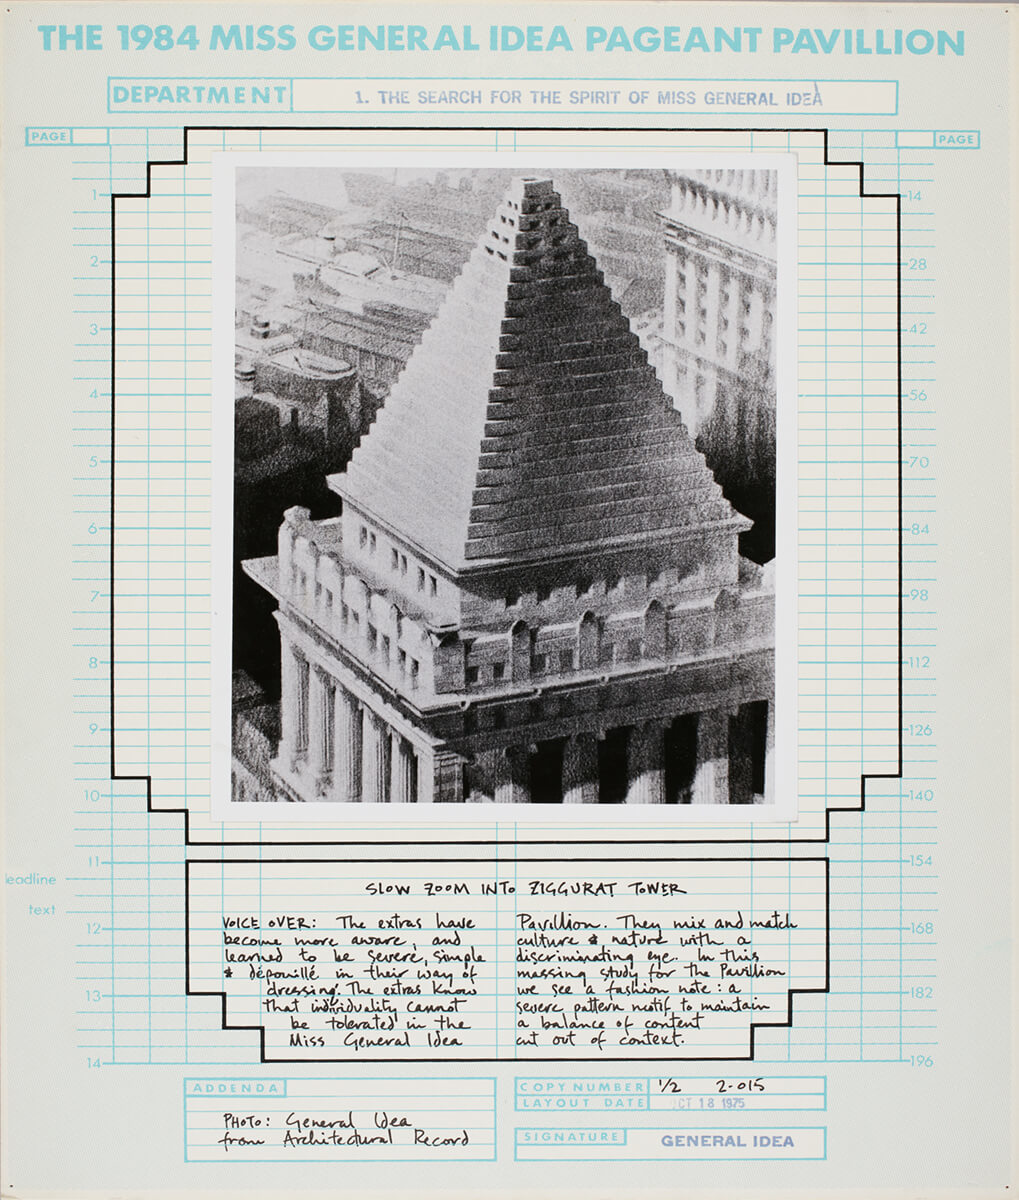 Art Canada Institute, General Idea, Slow Zoom Into Ziggurat Tower, 1975. From Showcard Series, 1975–79